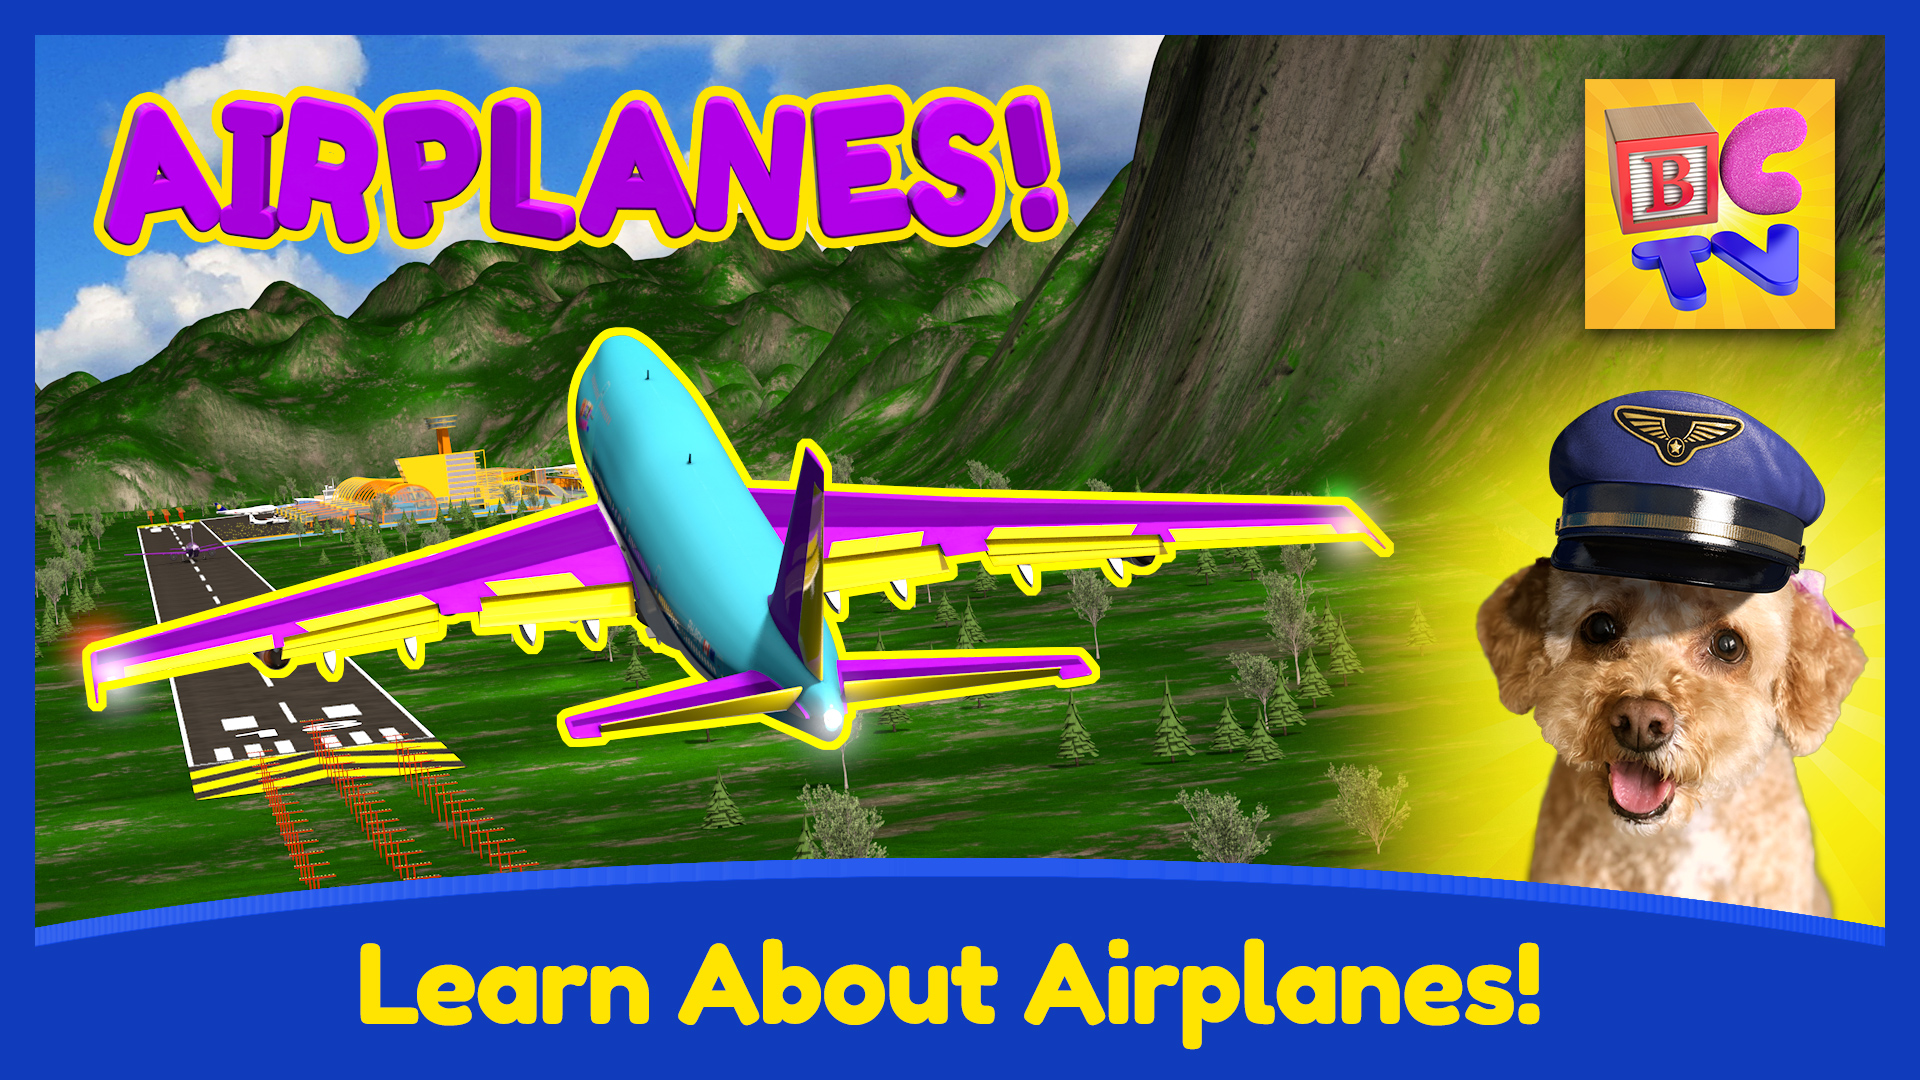 How do Airplanes Work?